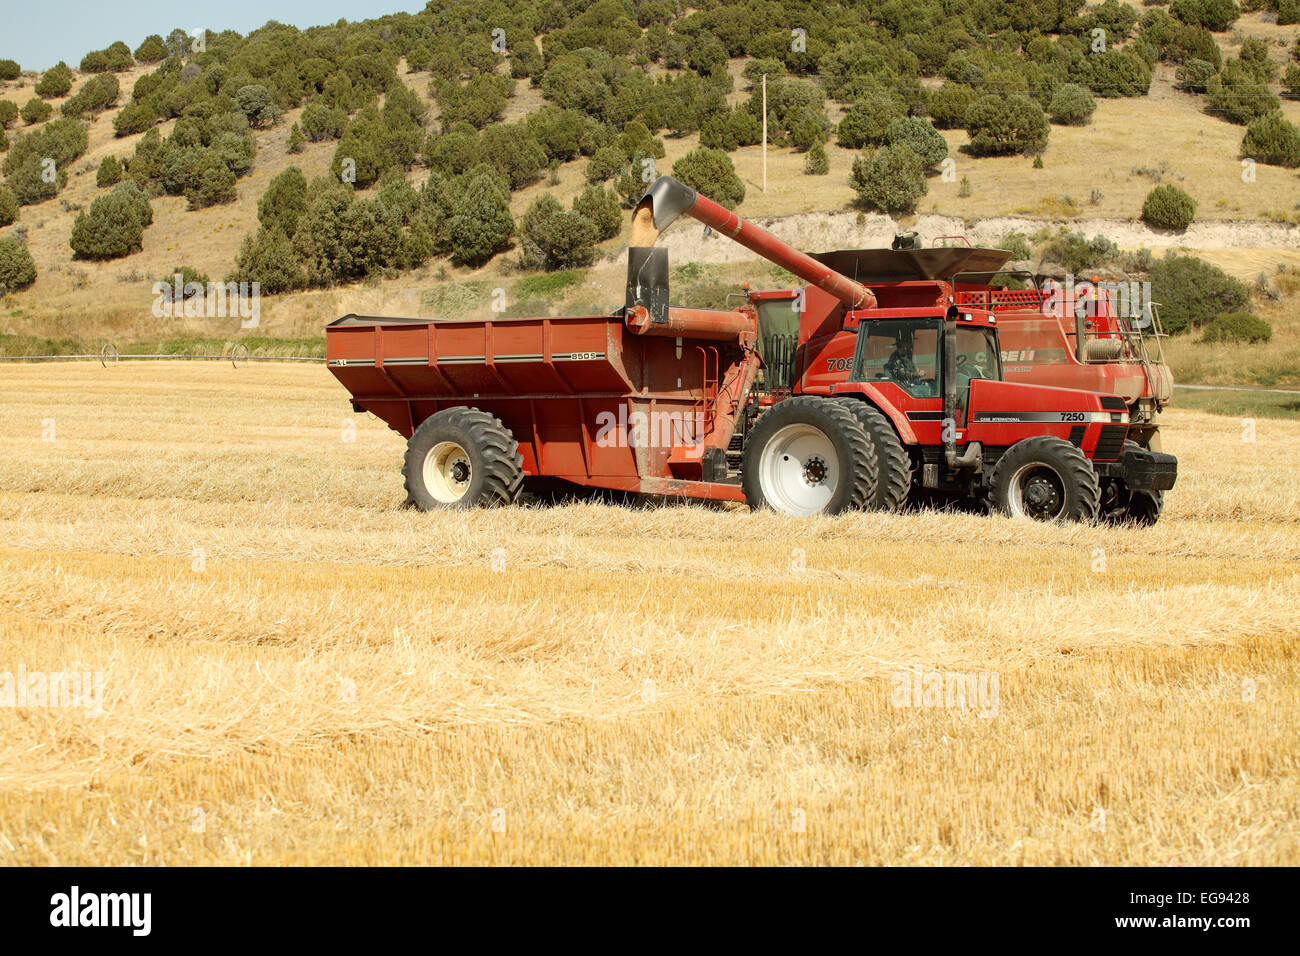 A combine harvesting wheat in a field Stock Photo